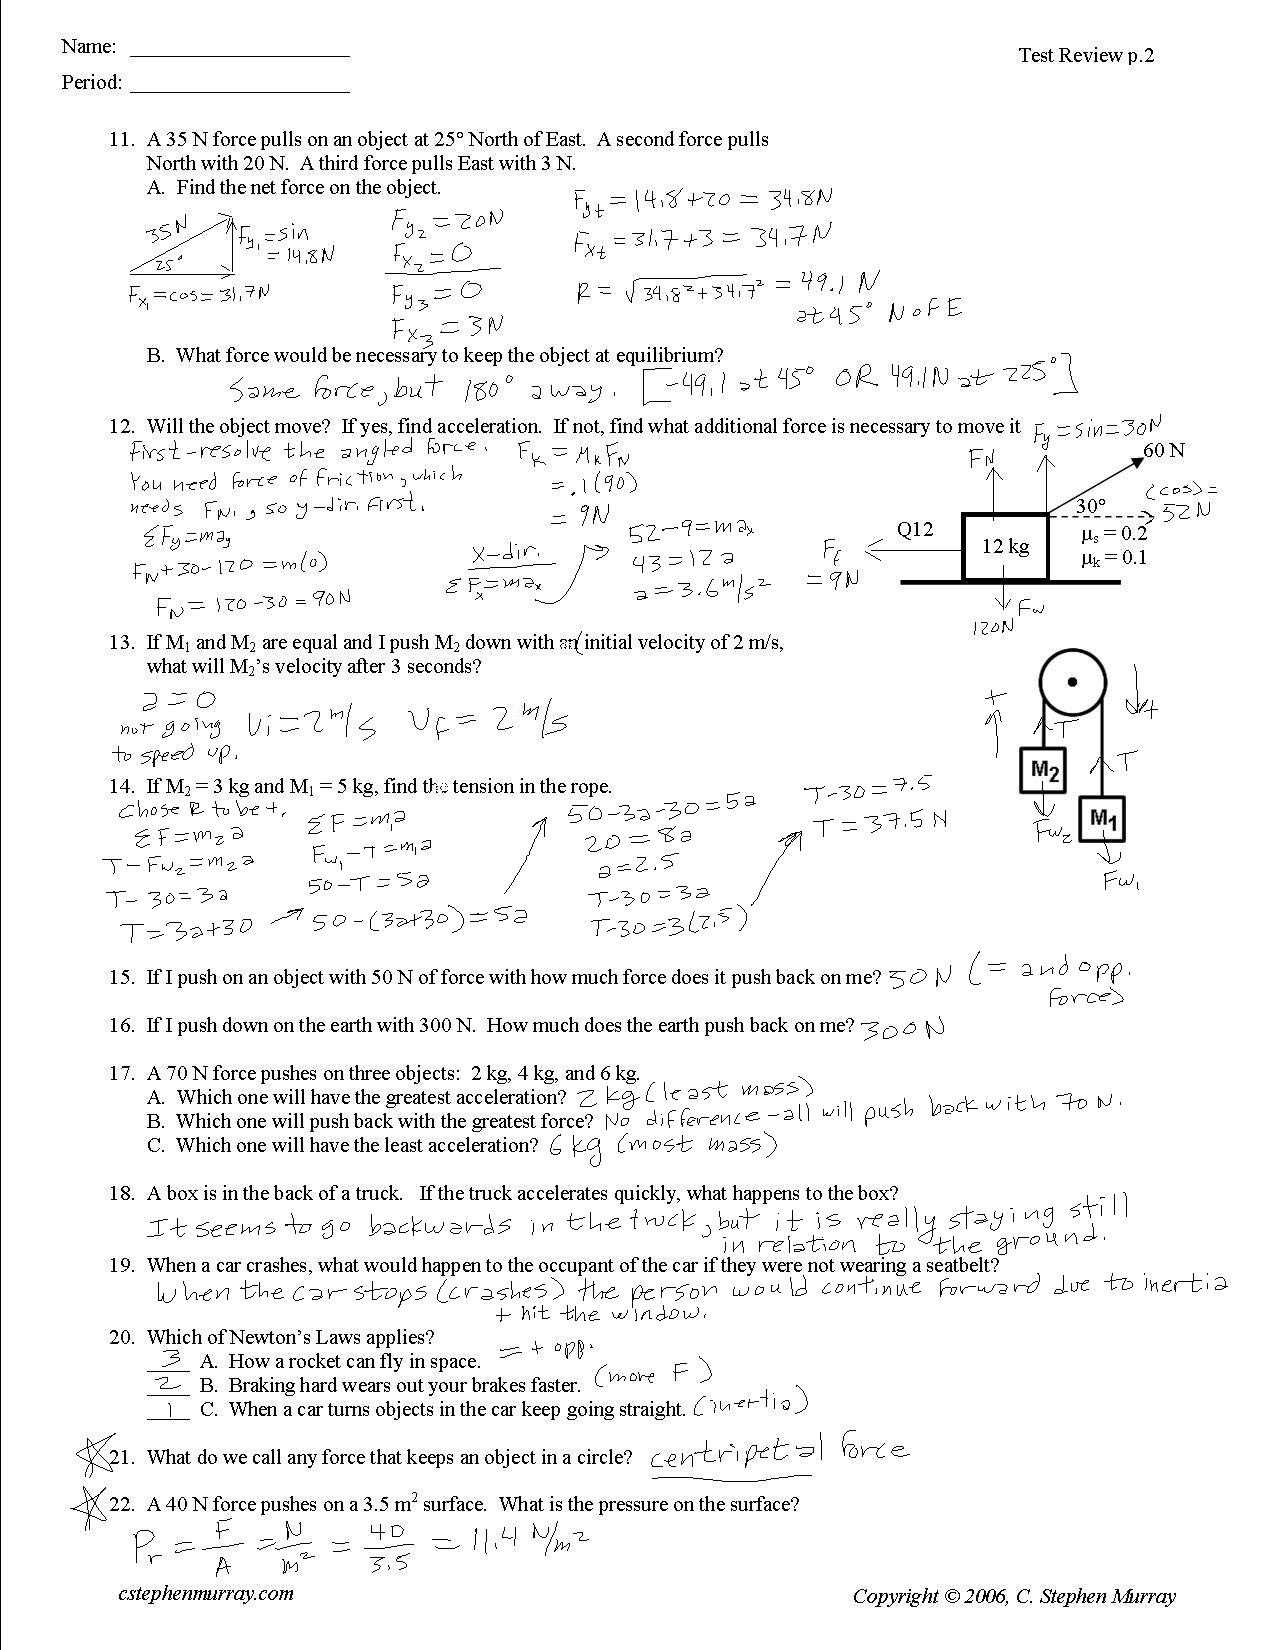 Forces Worksheet 1 Answer Key together with force and Motion Review Worksheets the Best Worksheets Image